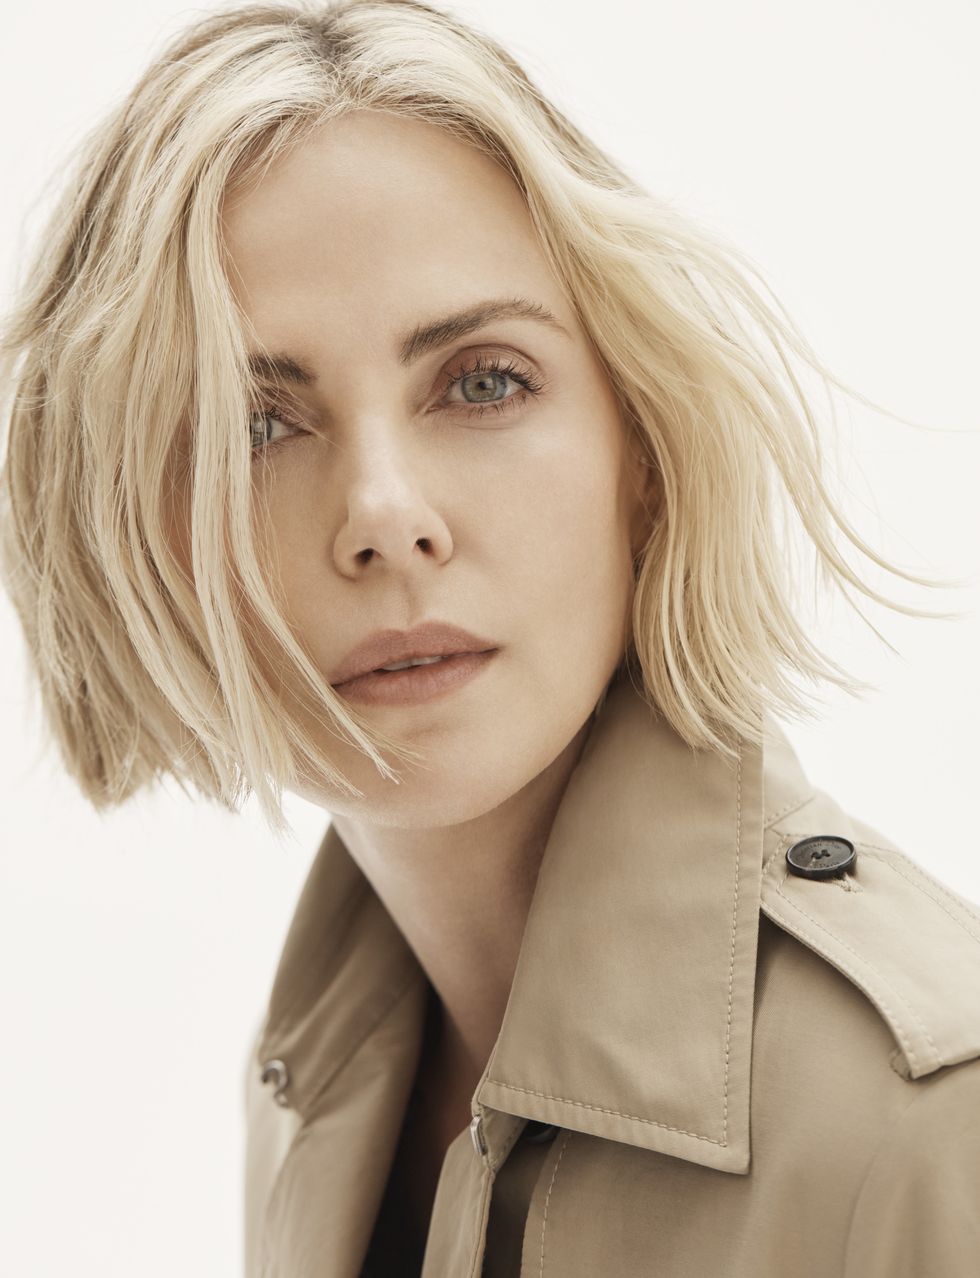 charlize theron beauty interview